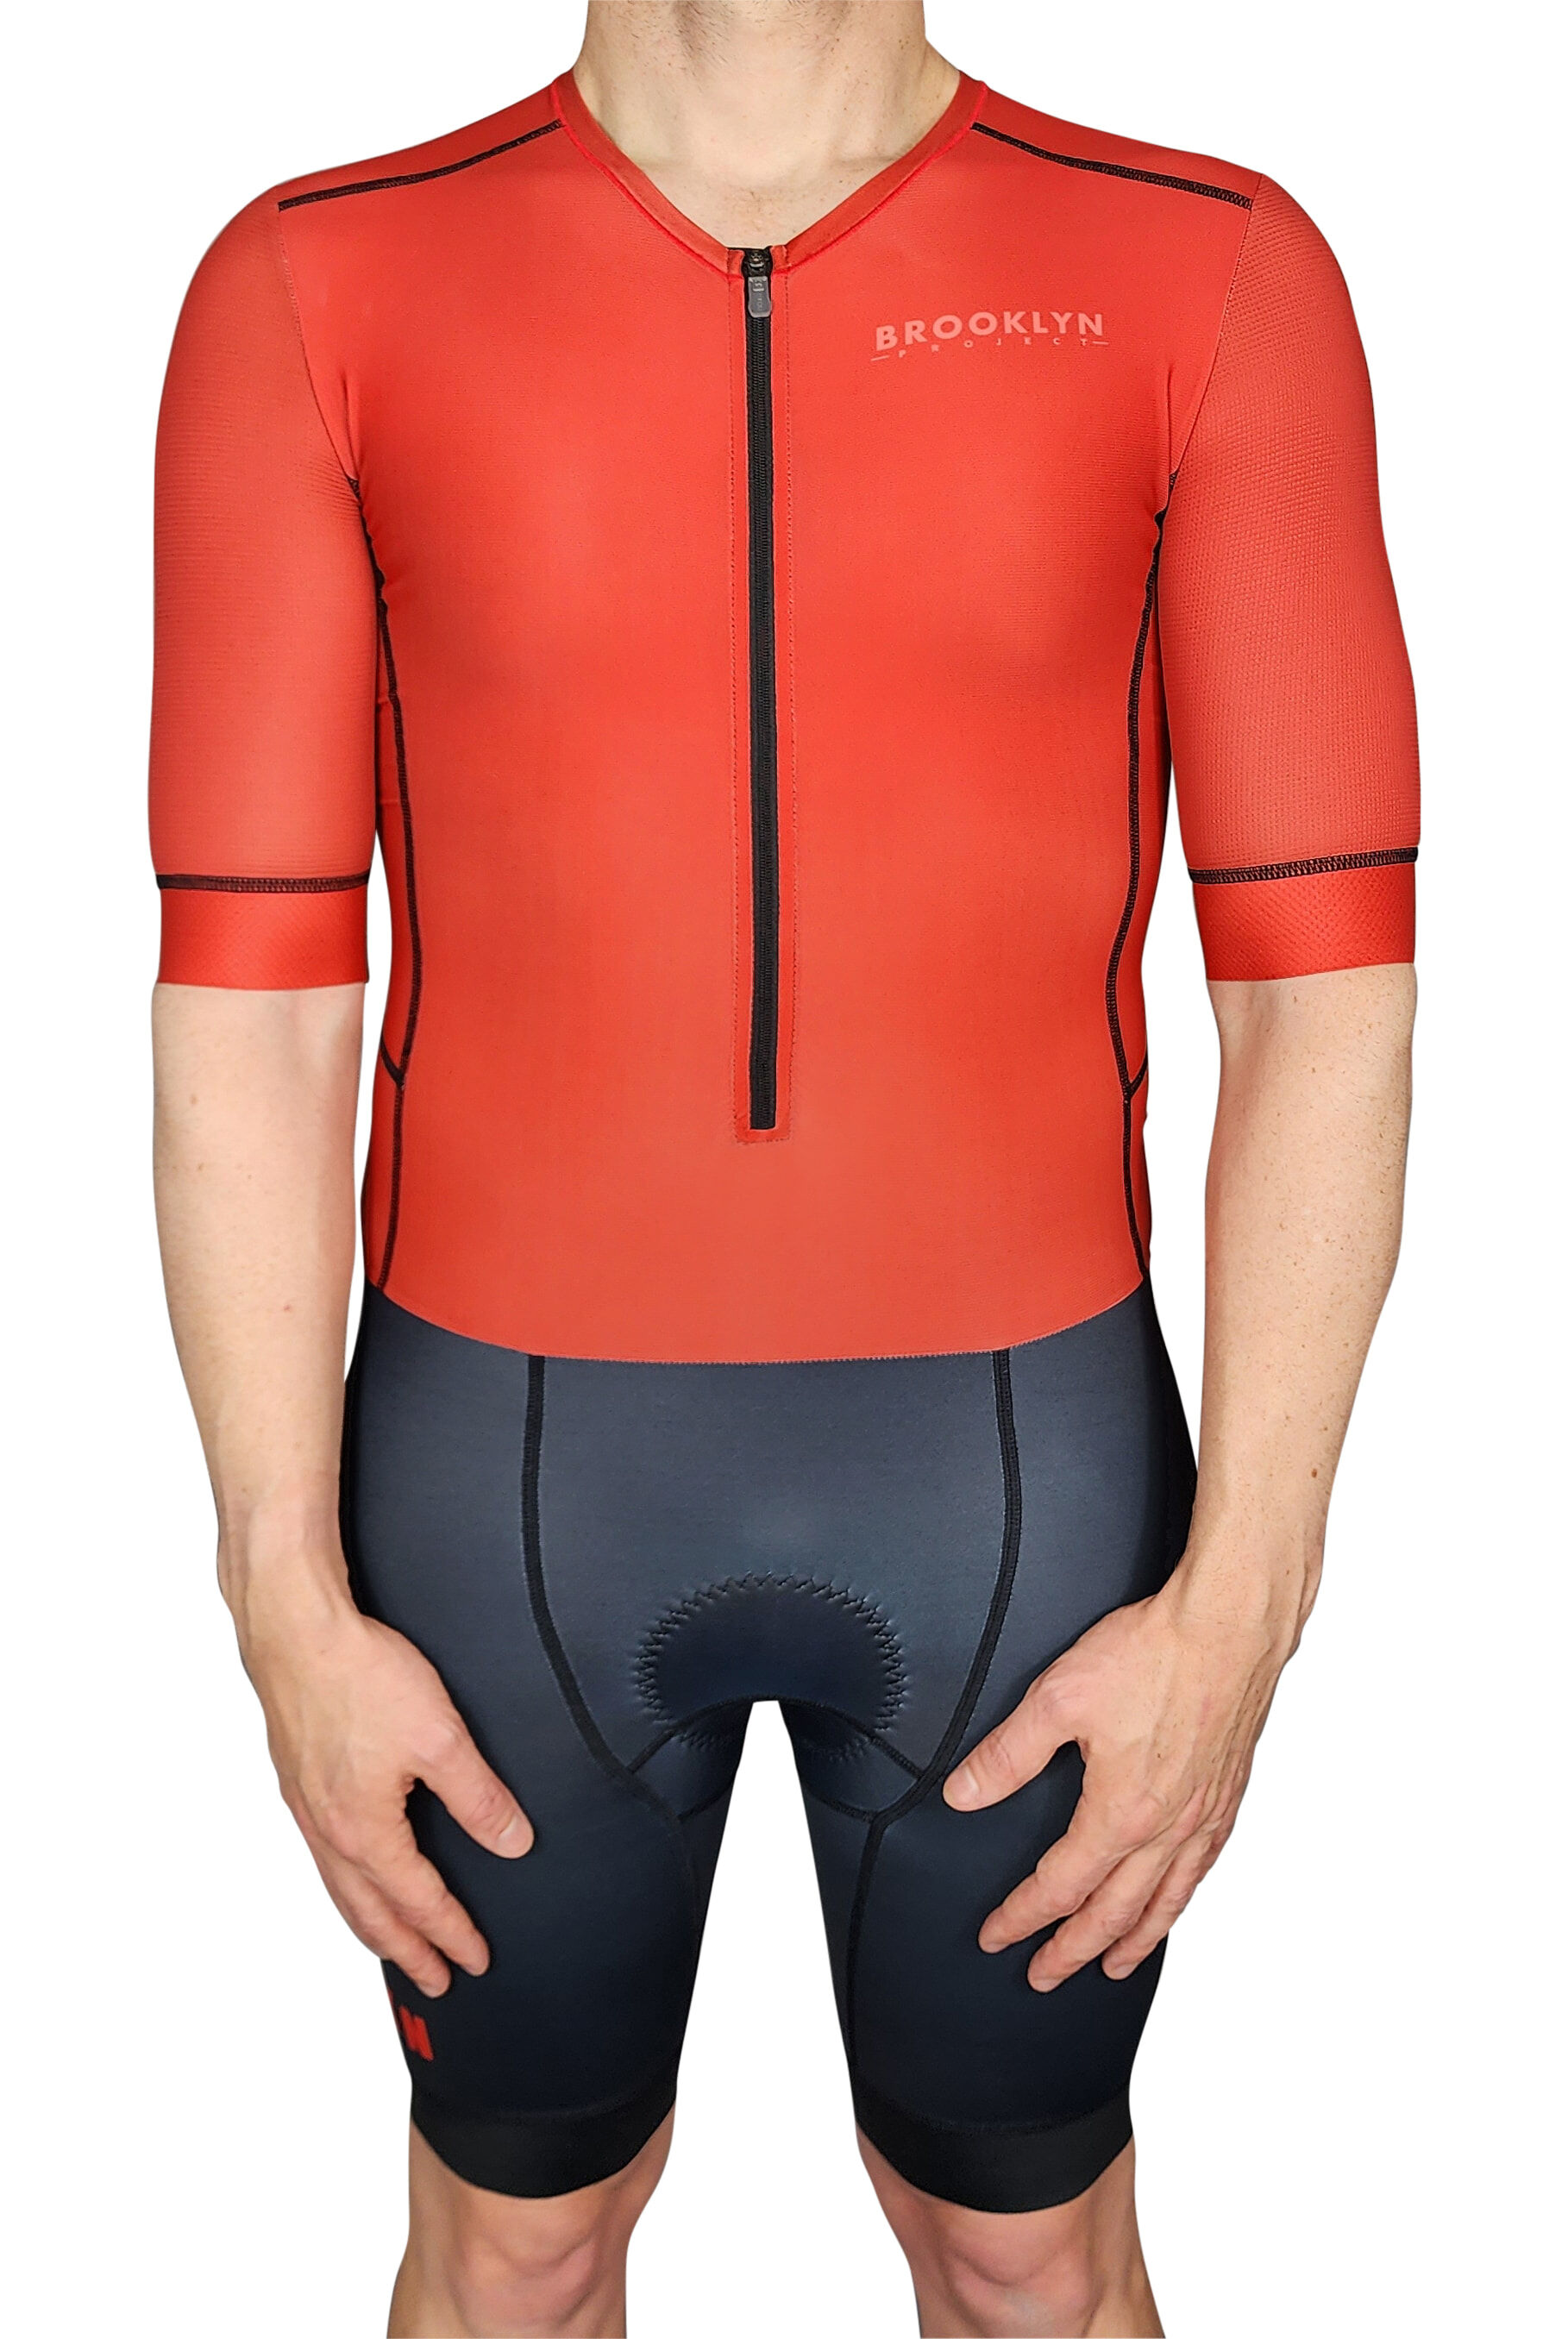 BKN Mens Black and Red Tri Suit Front